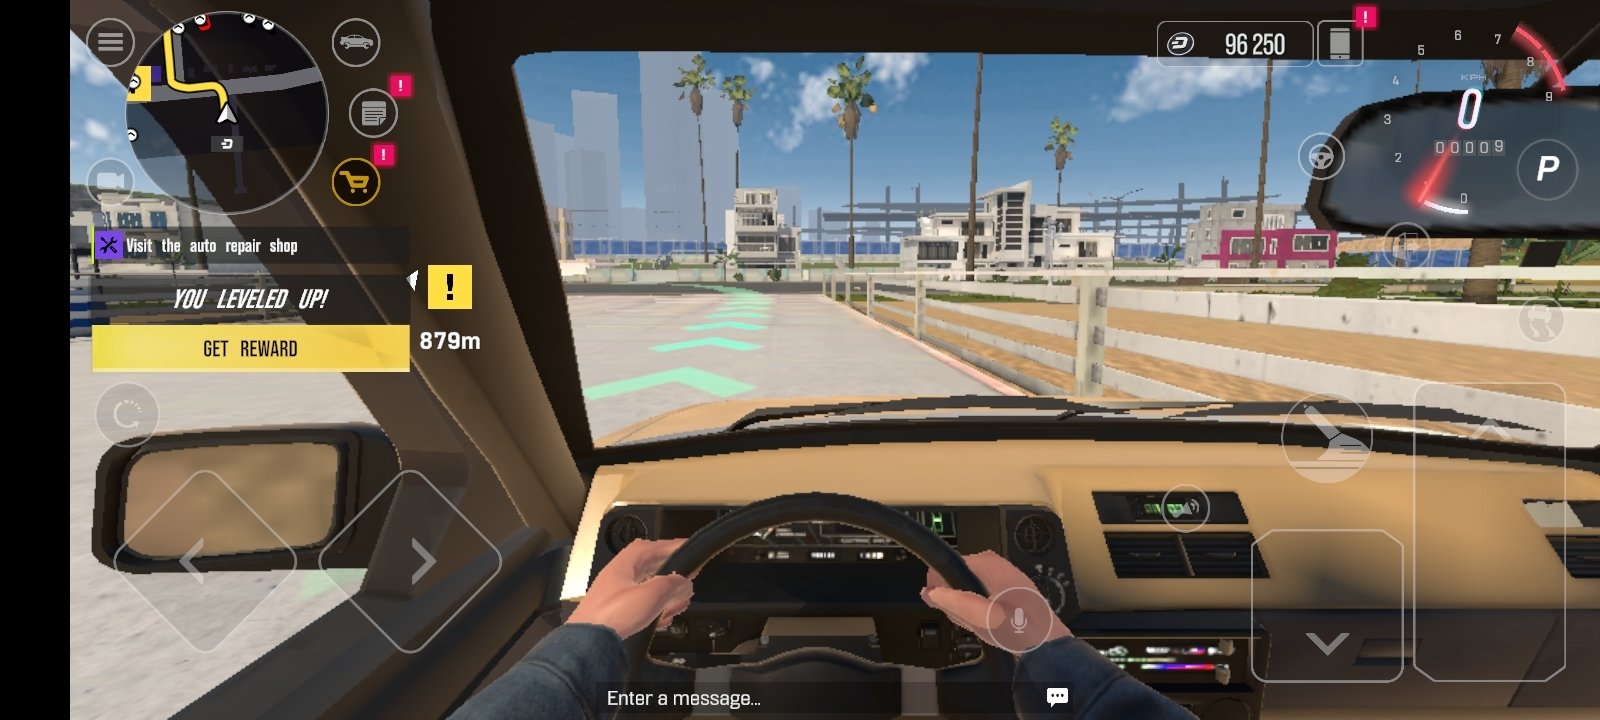 Racing Online:Car Driving Game APK for Android - Download